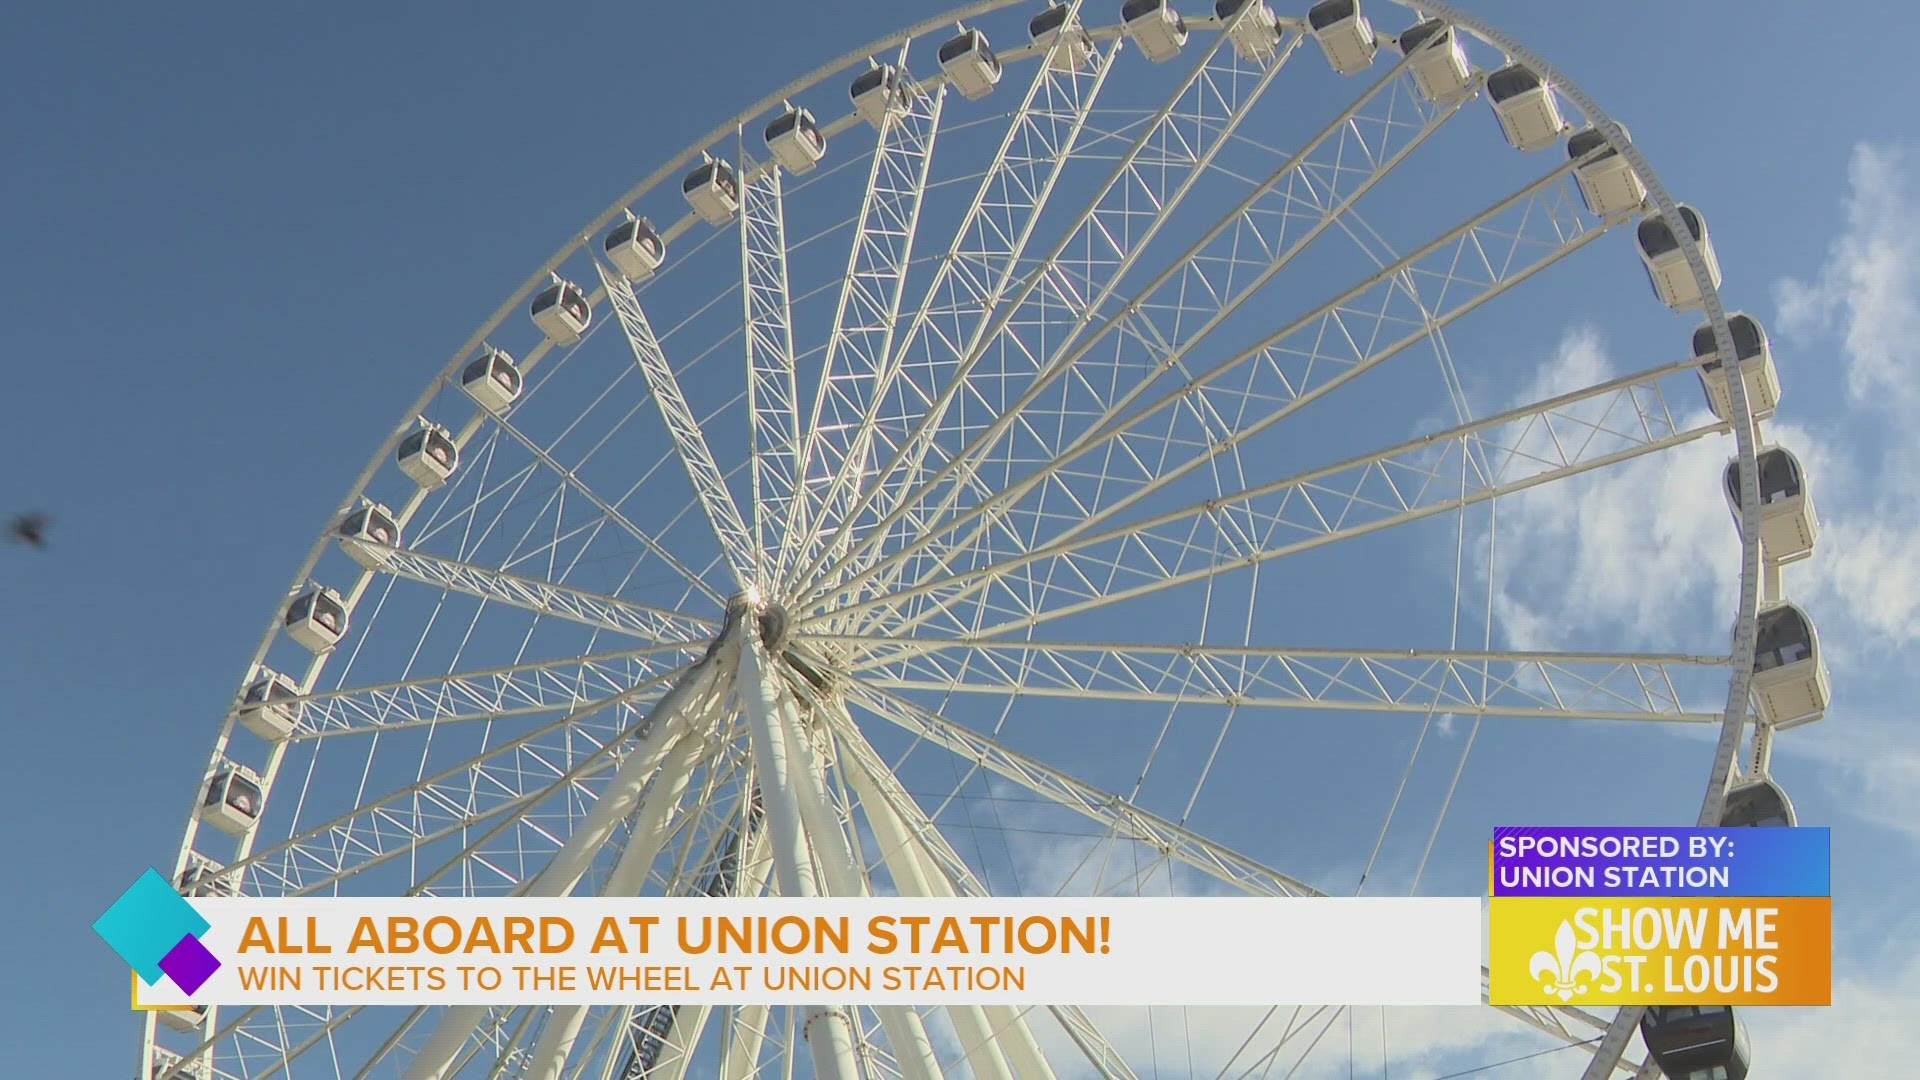 One (1) winner will receive a family-four-pack (4) of tickets to The Wheel at Union Station.